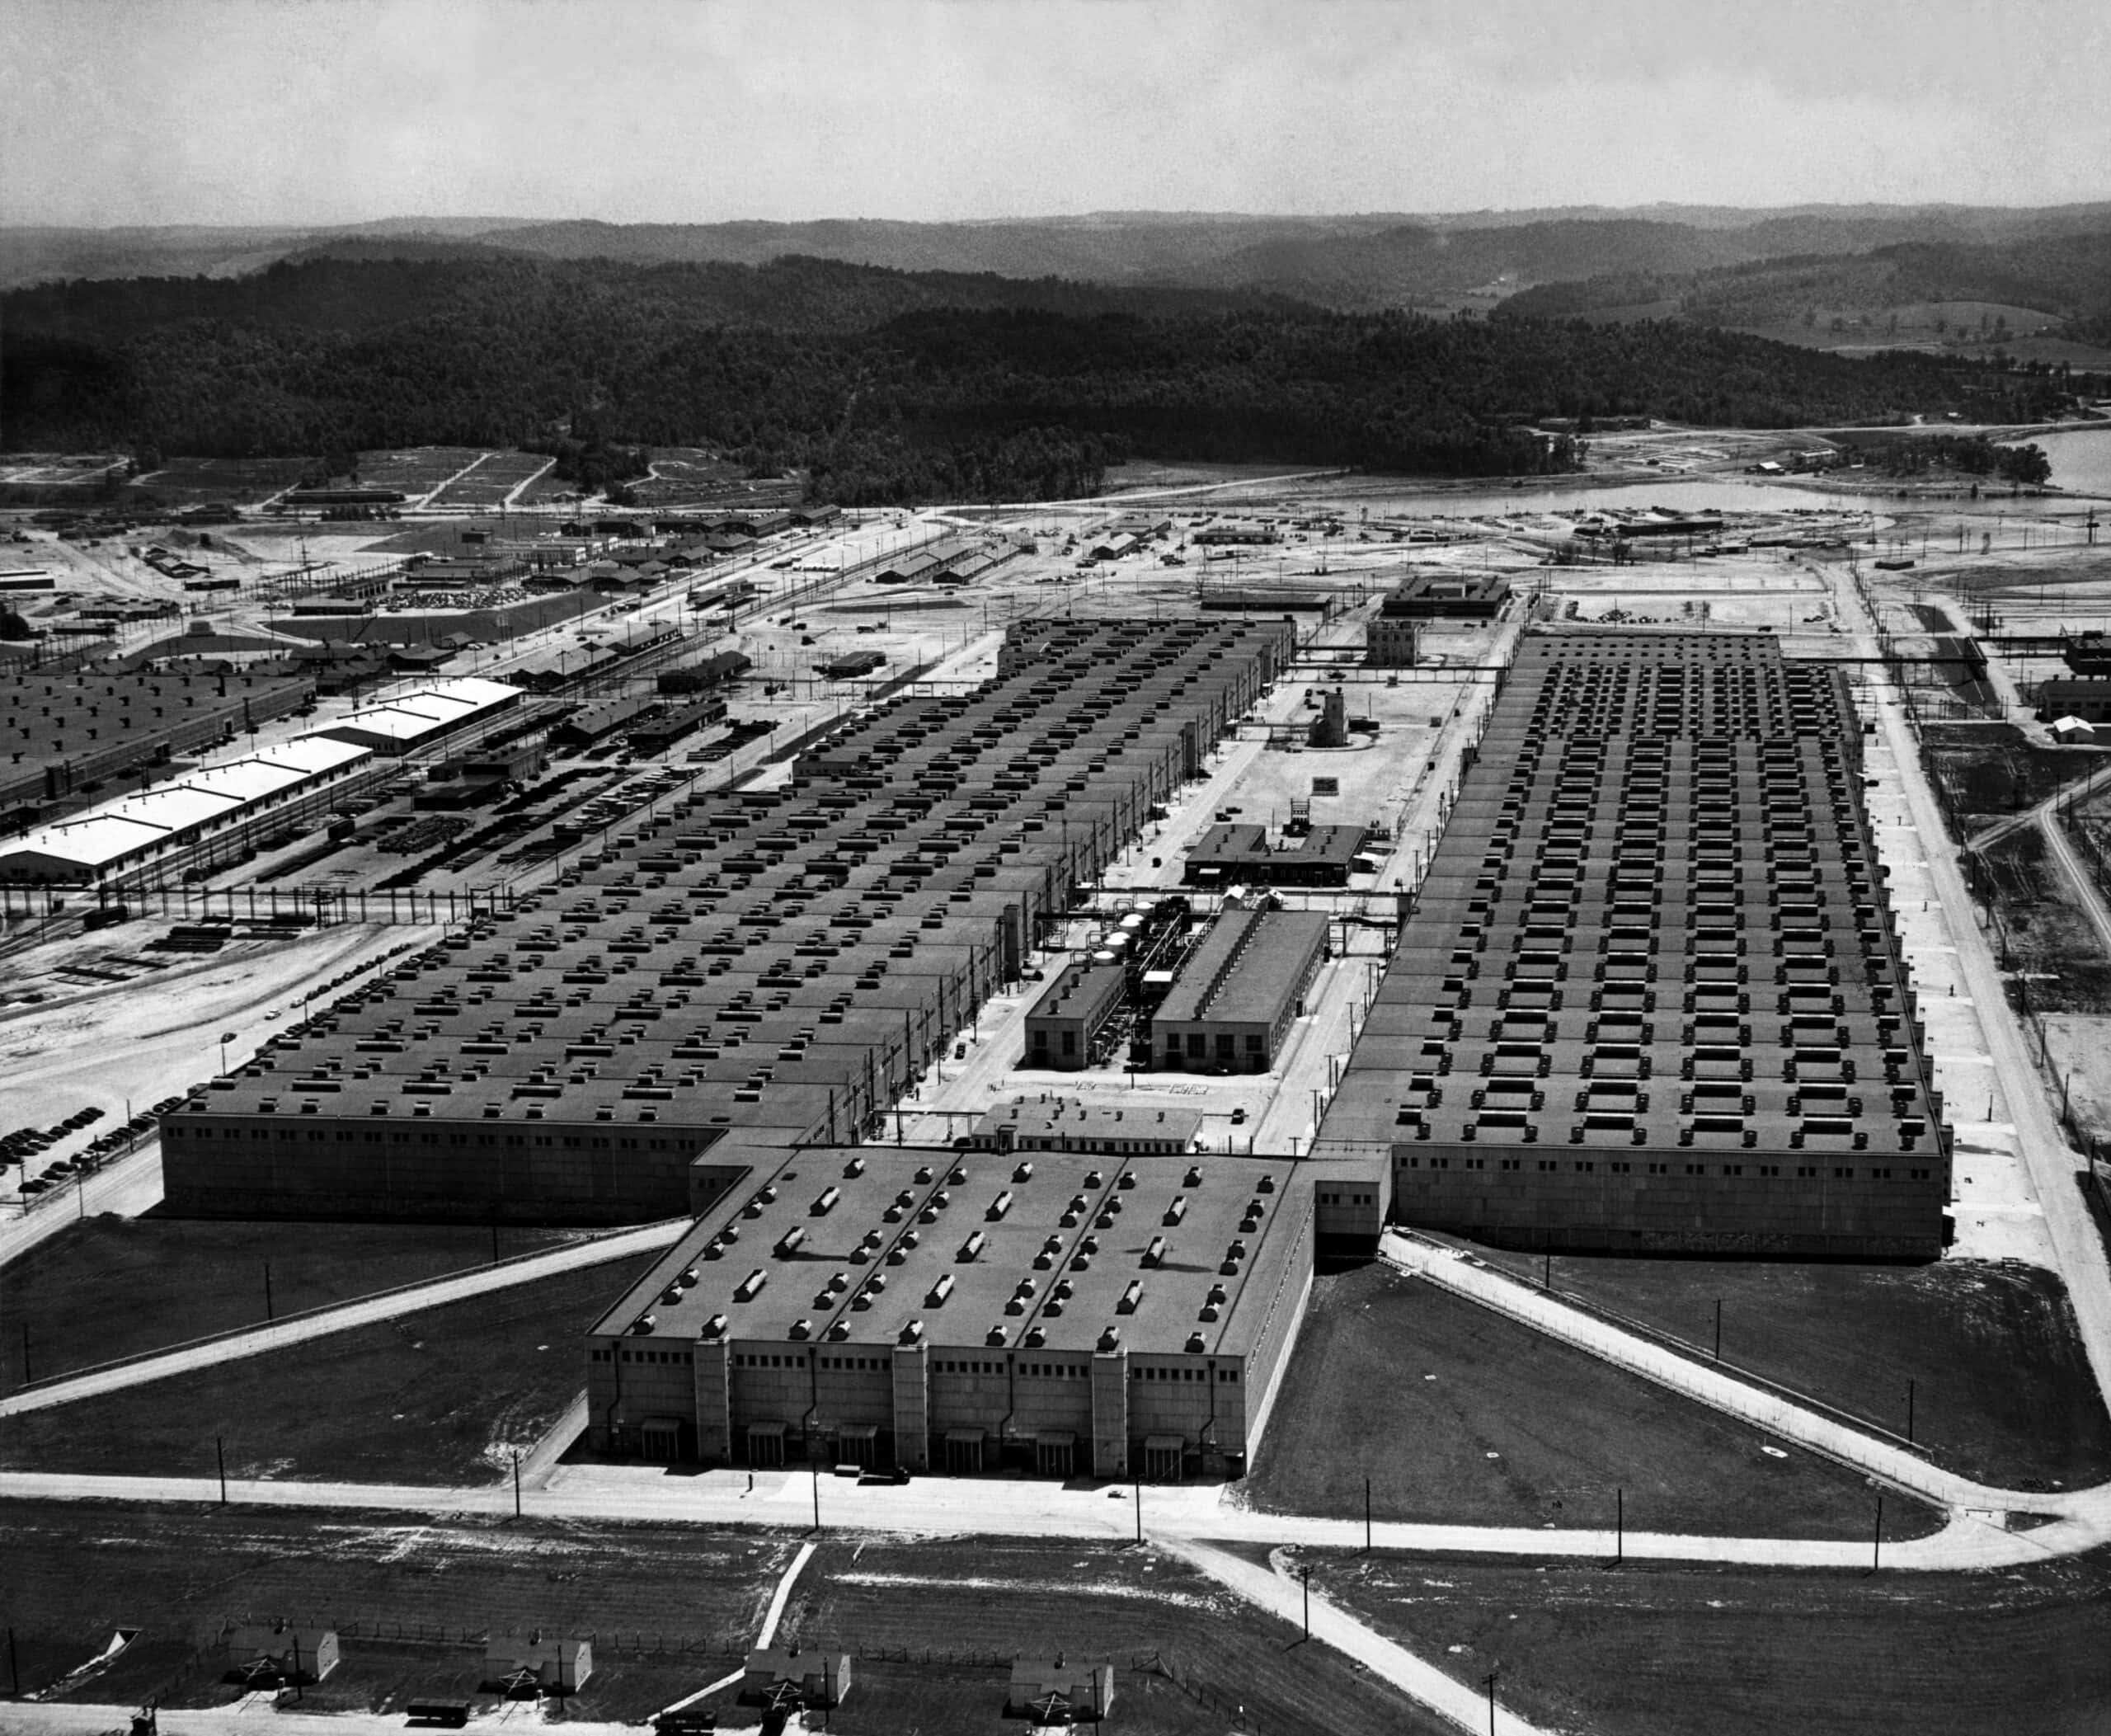 The Manhattan Project facts